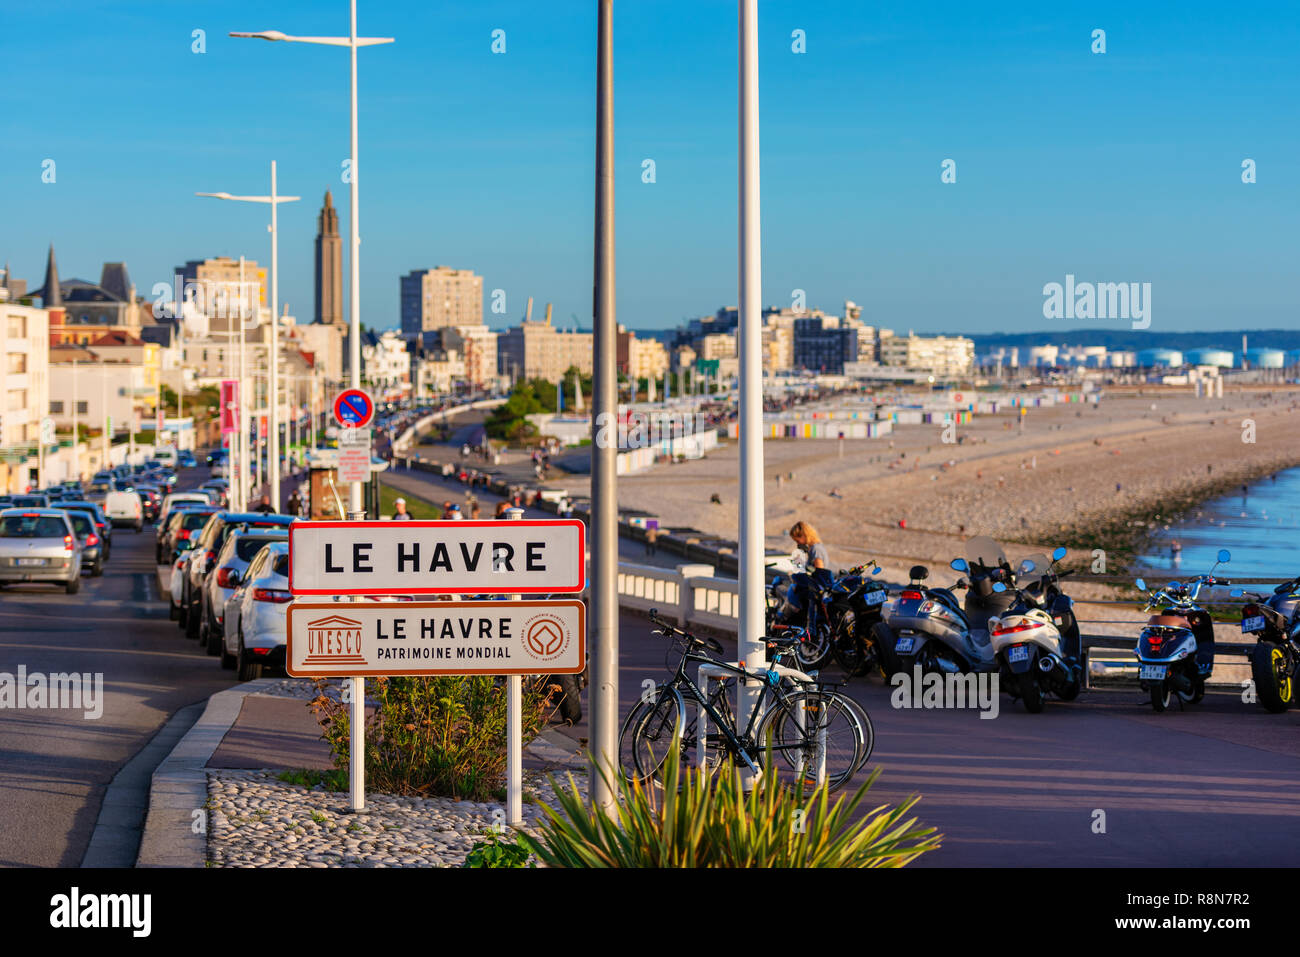 Entrance Sign to Le Havre, Normandy, France. Since 2005 the downtown area of Le Havre has been declared an Unesco World Heritage site. Stock Photo